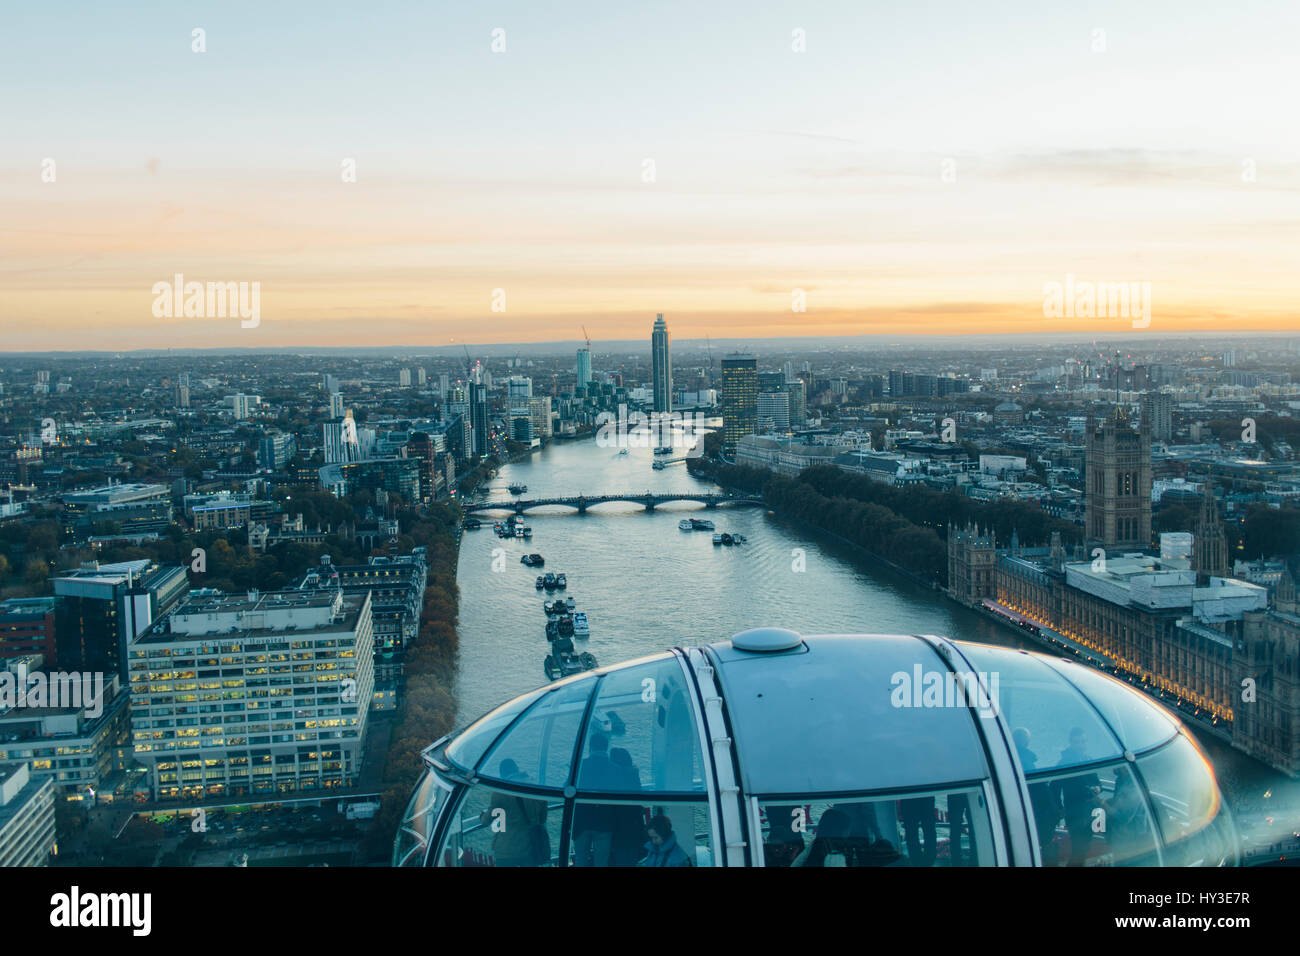 UK, England, London, River Thames and city panorama seen from London Eye Stock Photo